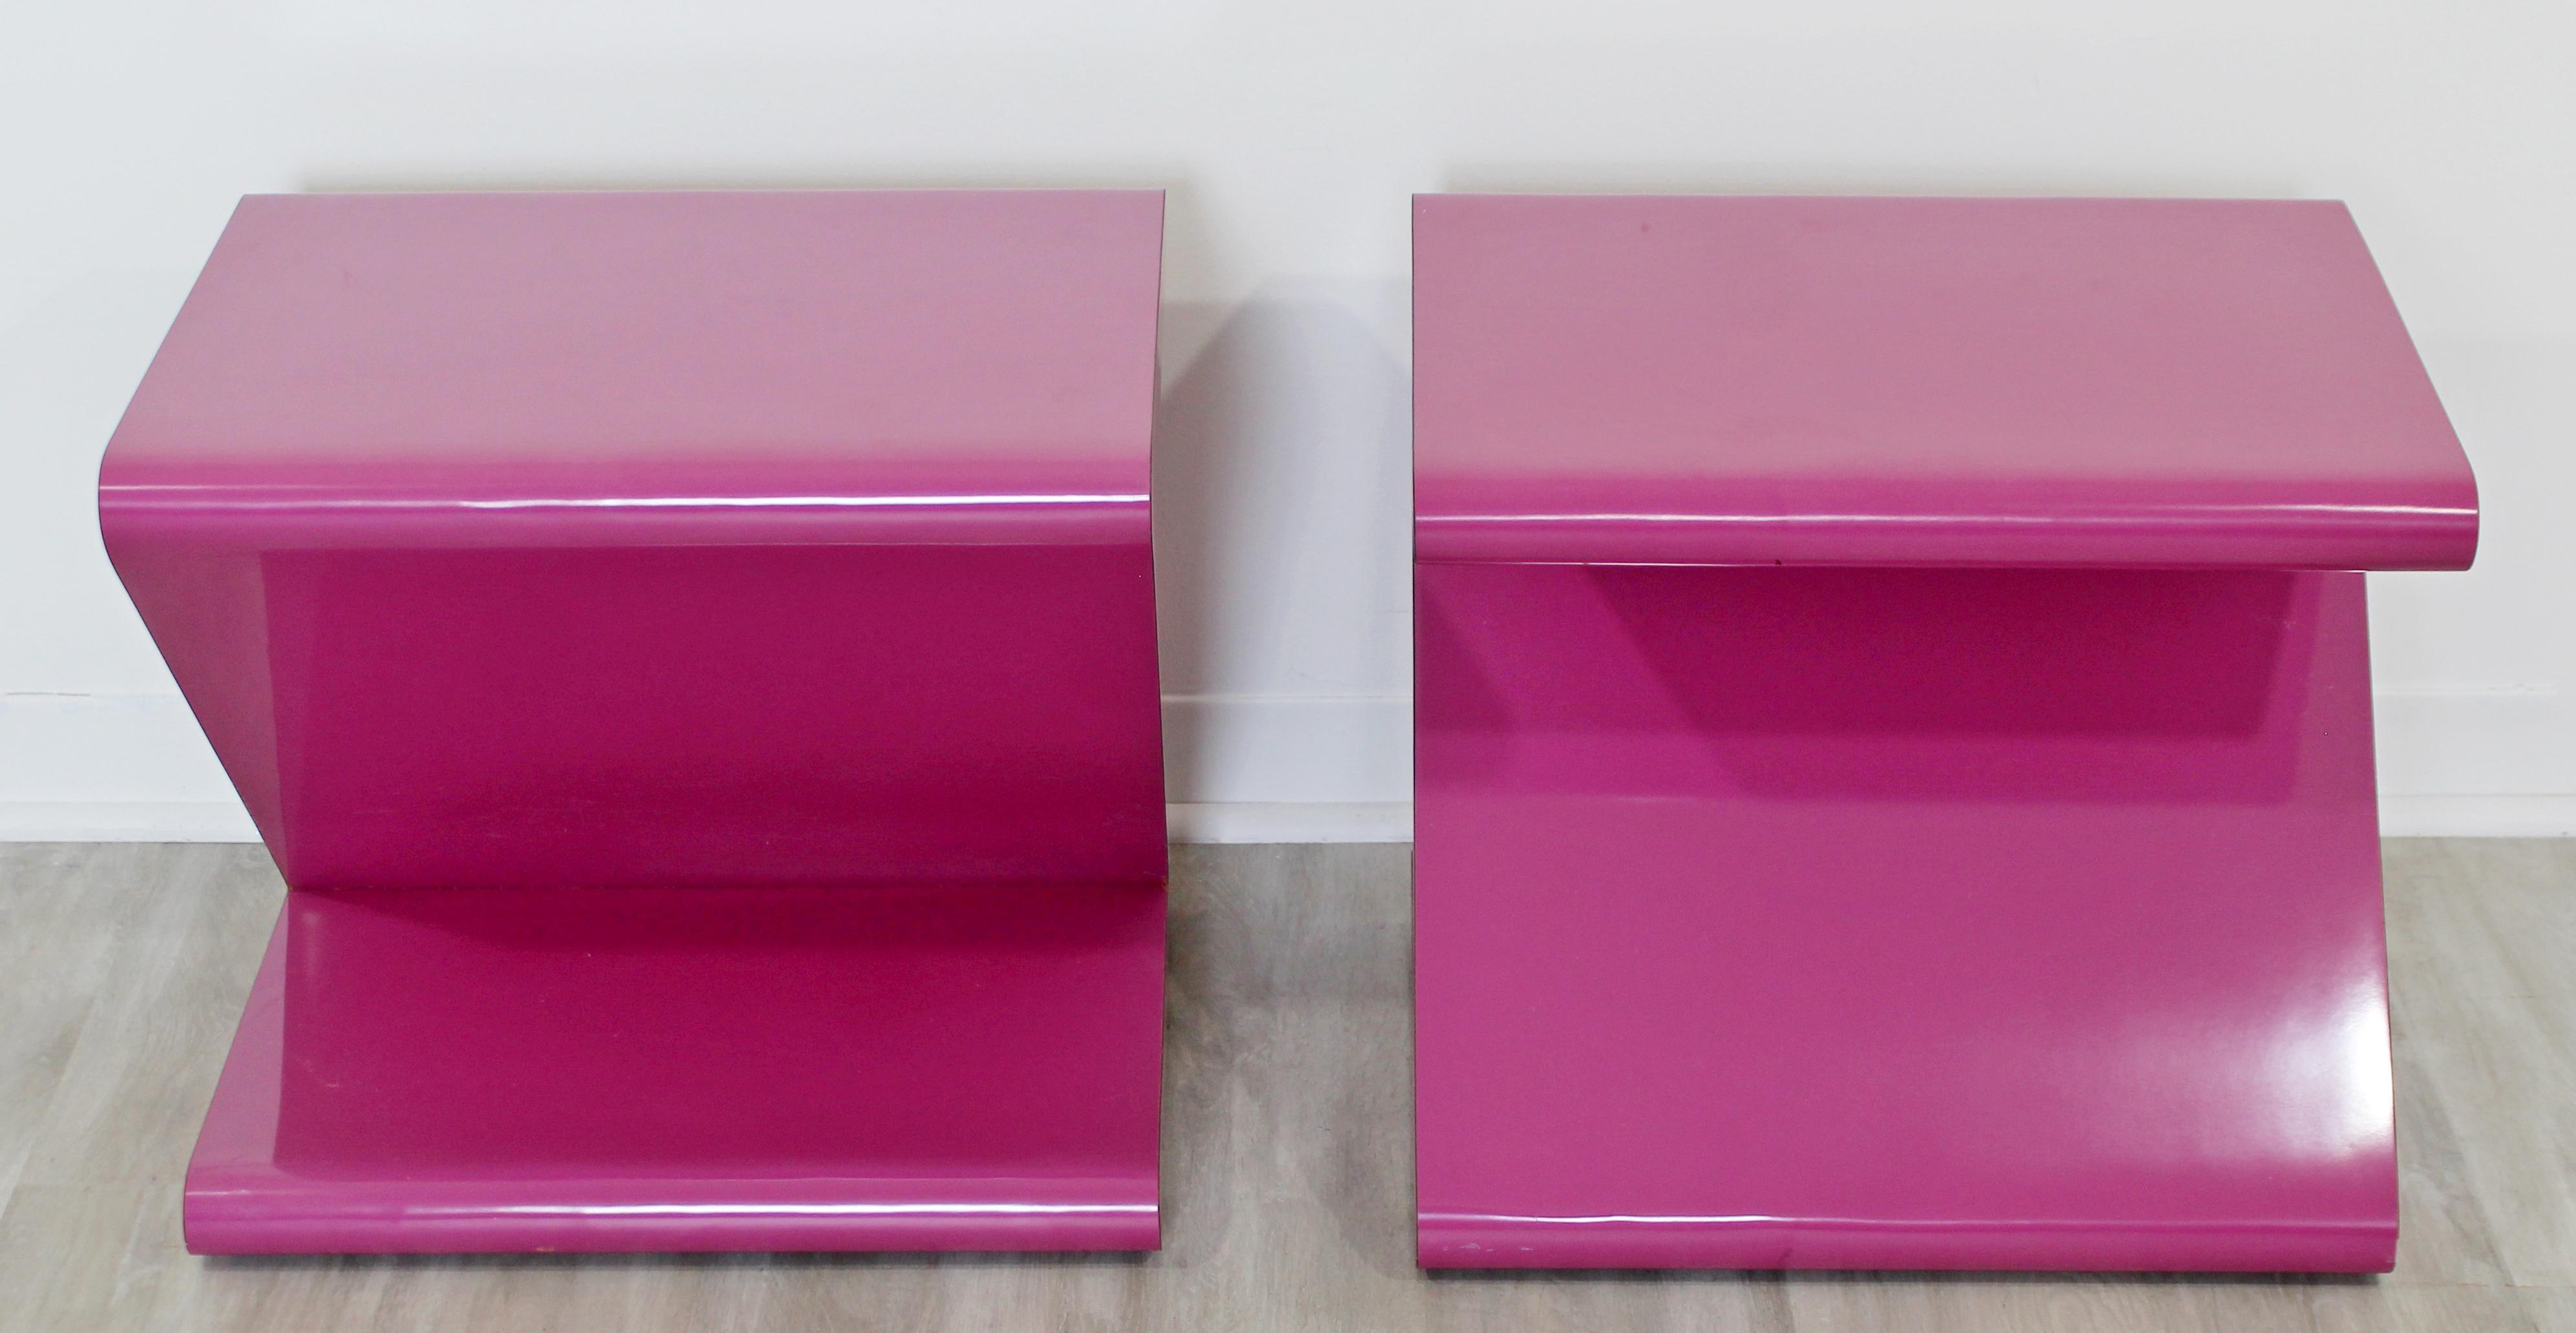 Contemporary Modern Pair of Acrylic Z-Shaped Side End Tables 1980s Pink 1